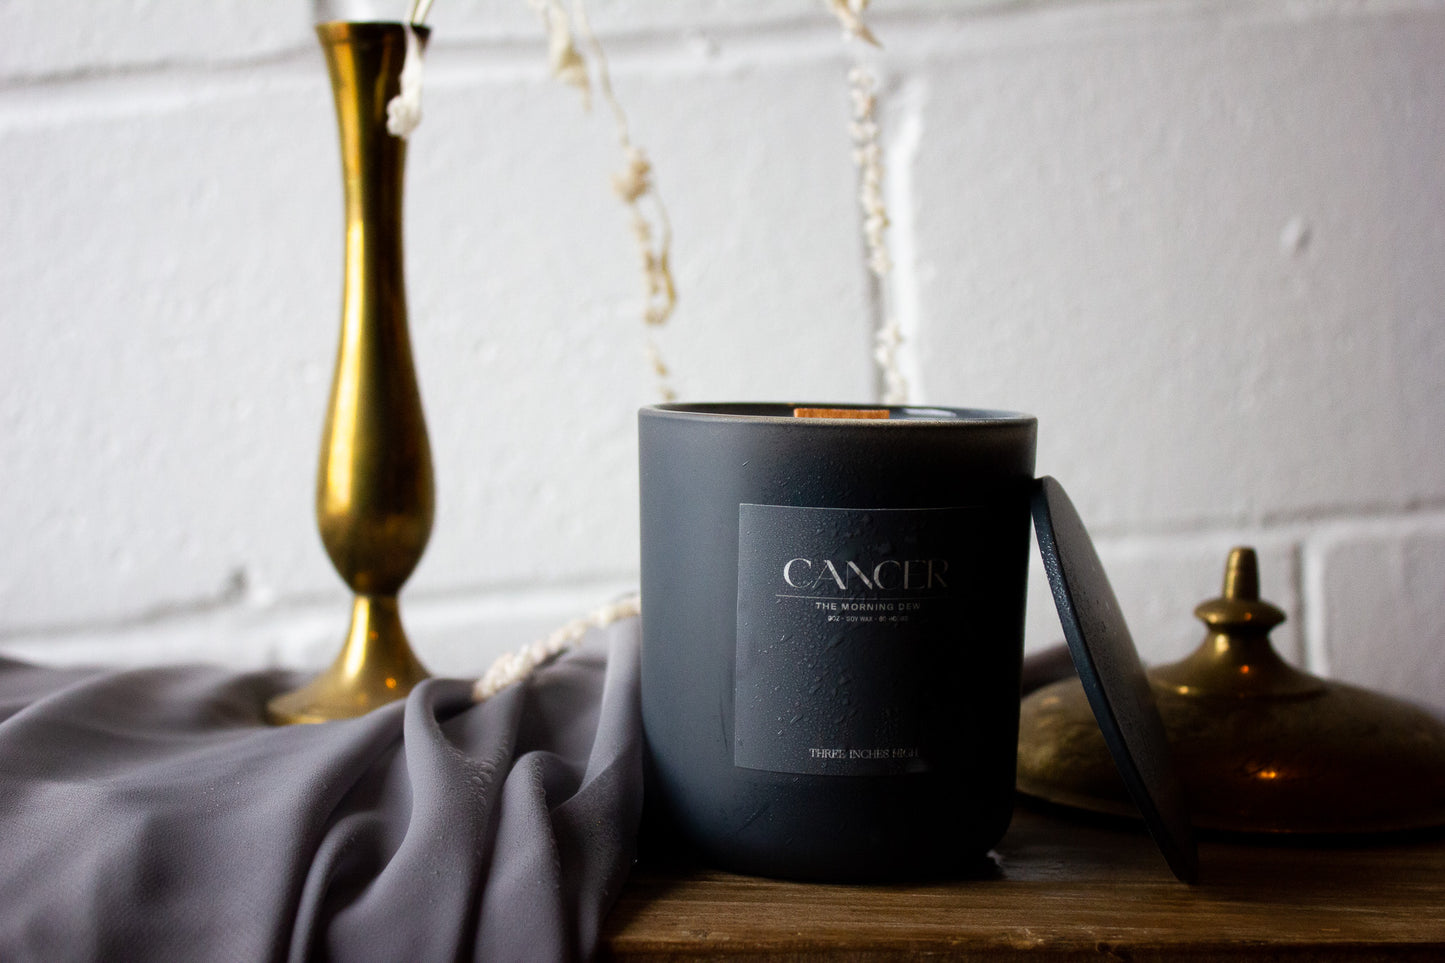 9oz Soy Wax Candle - Cancer